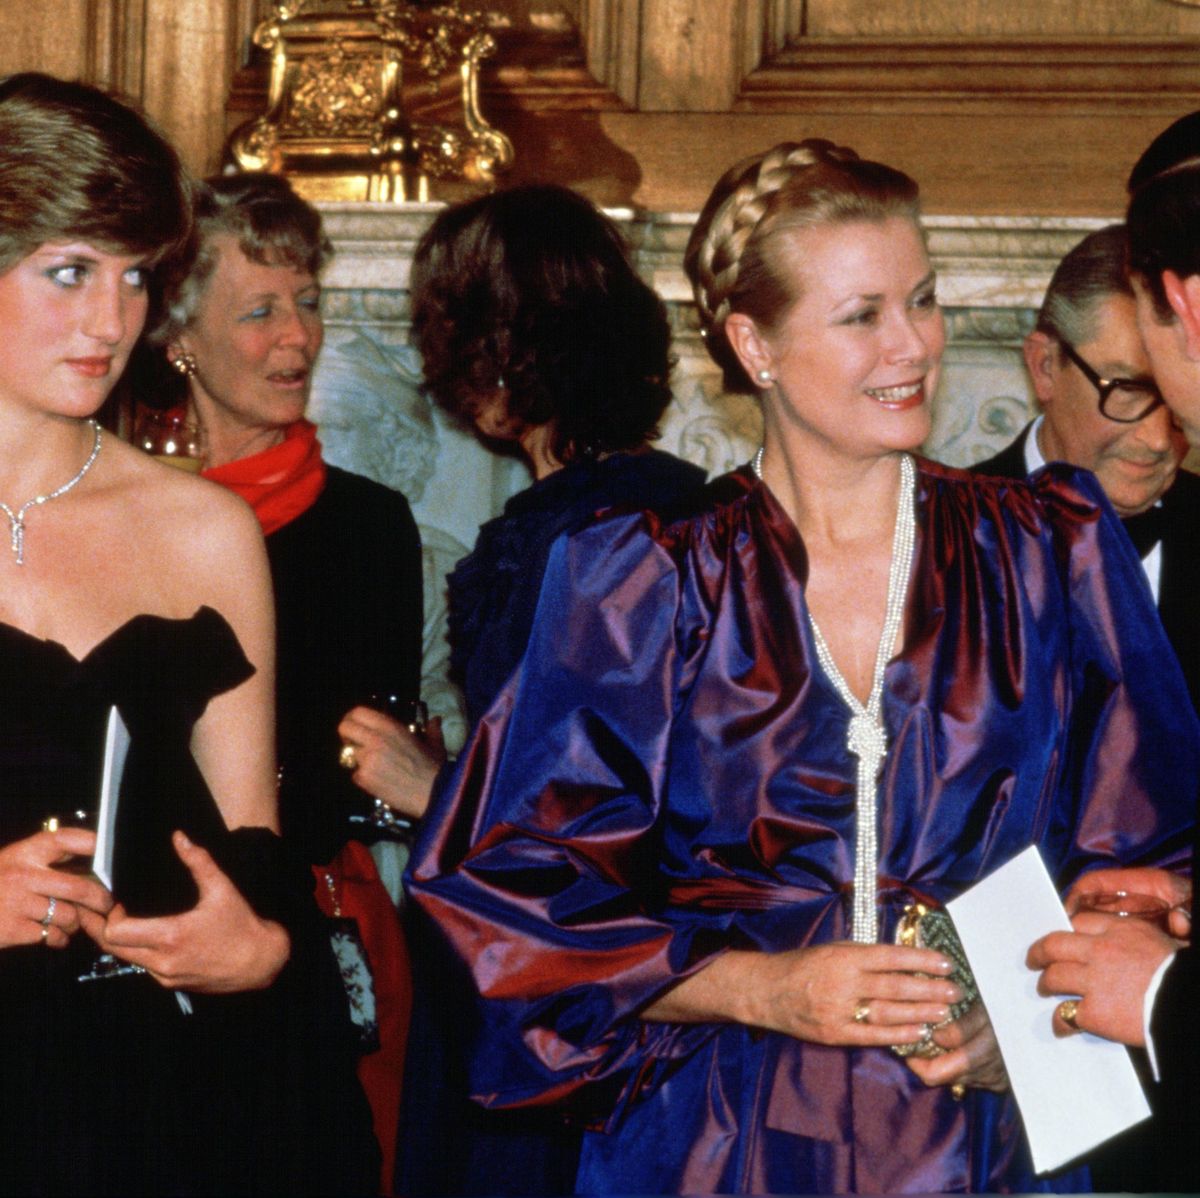 Princess Diana wore Eagles gear in the '90s thanks to Grace Kelly